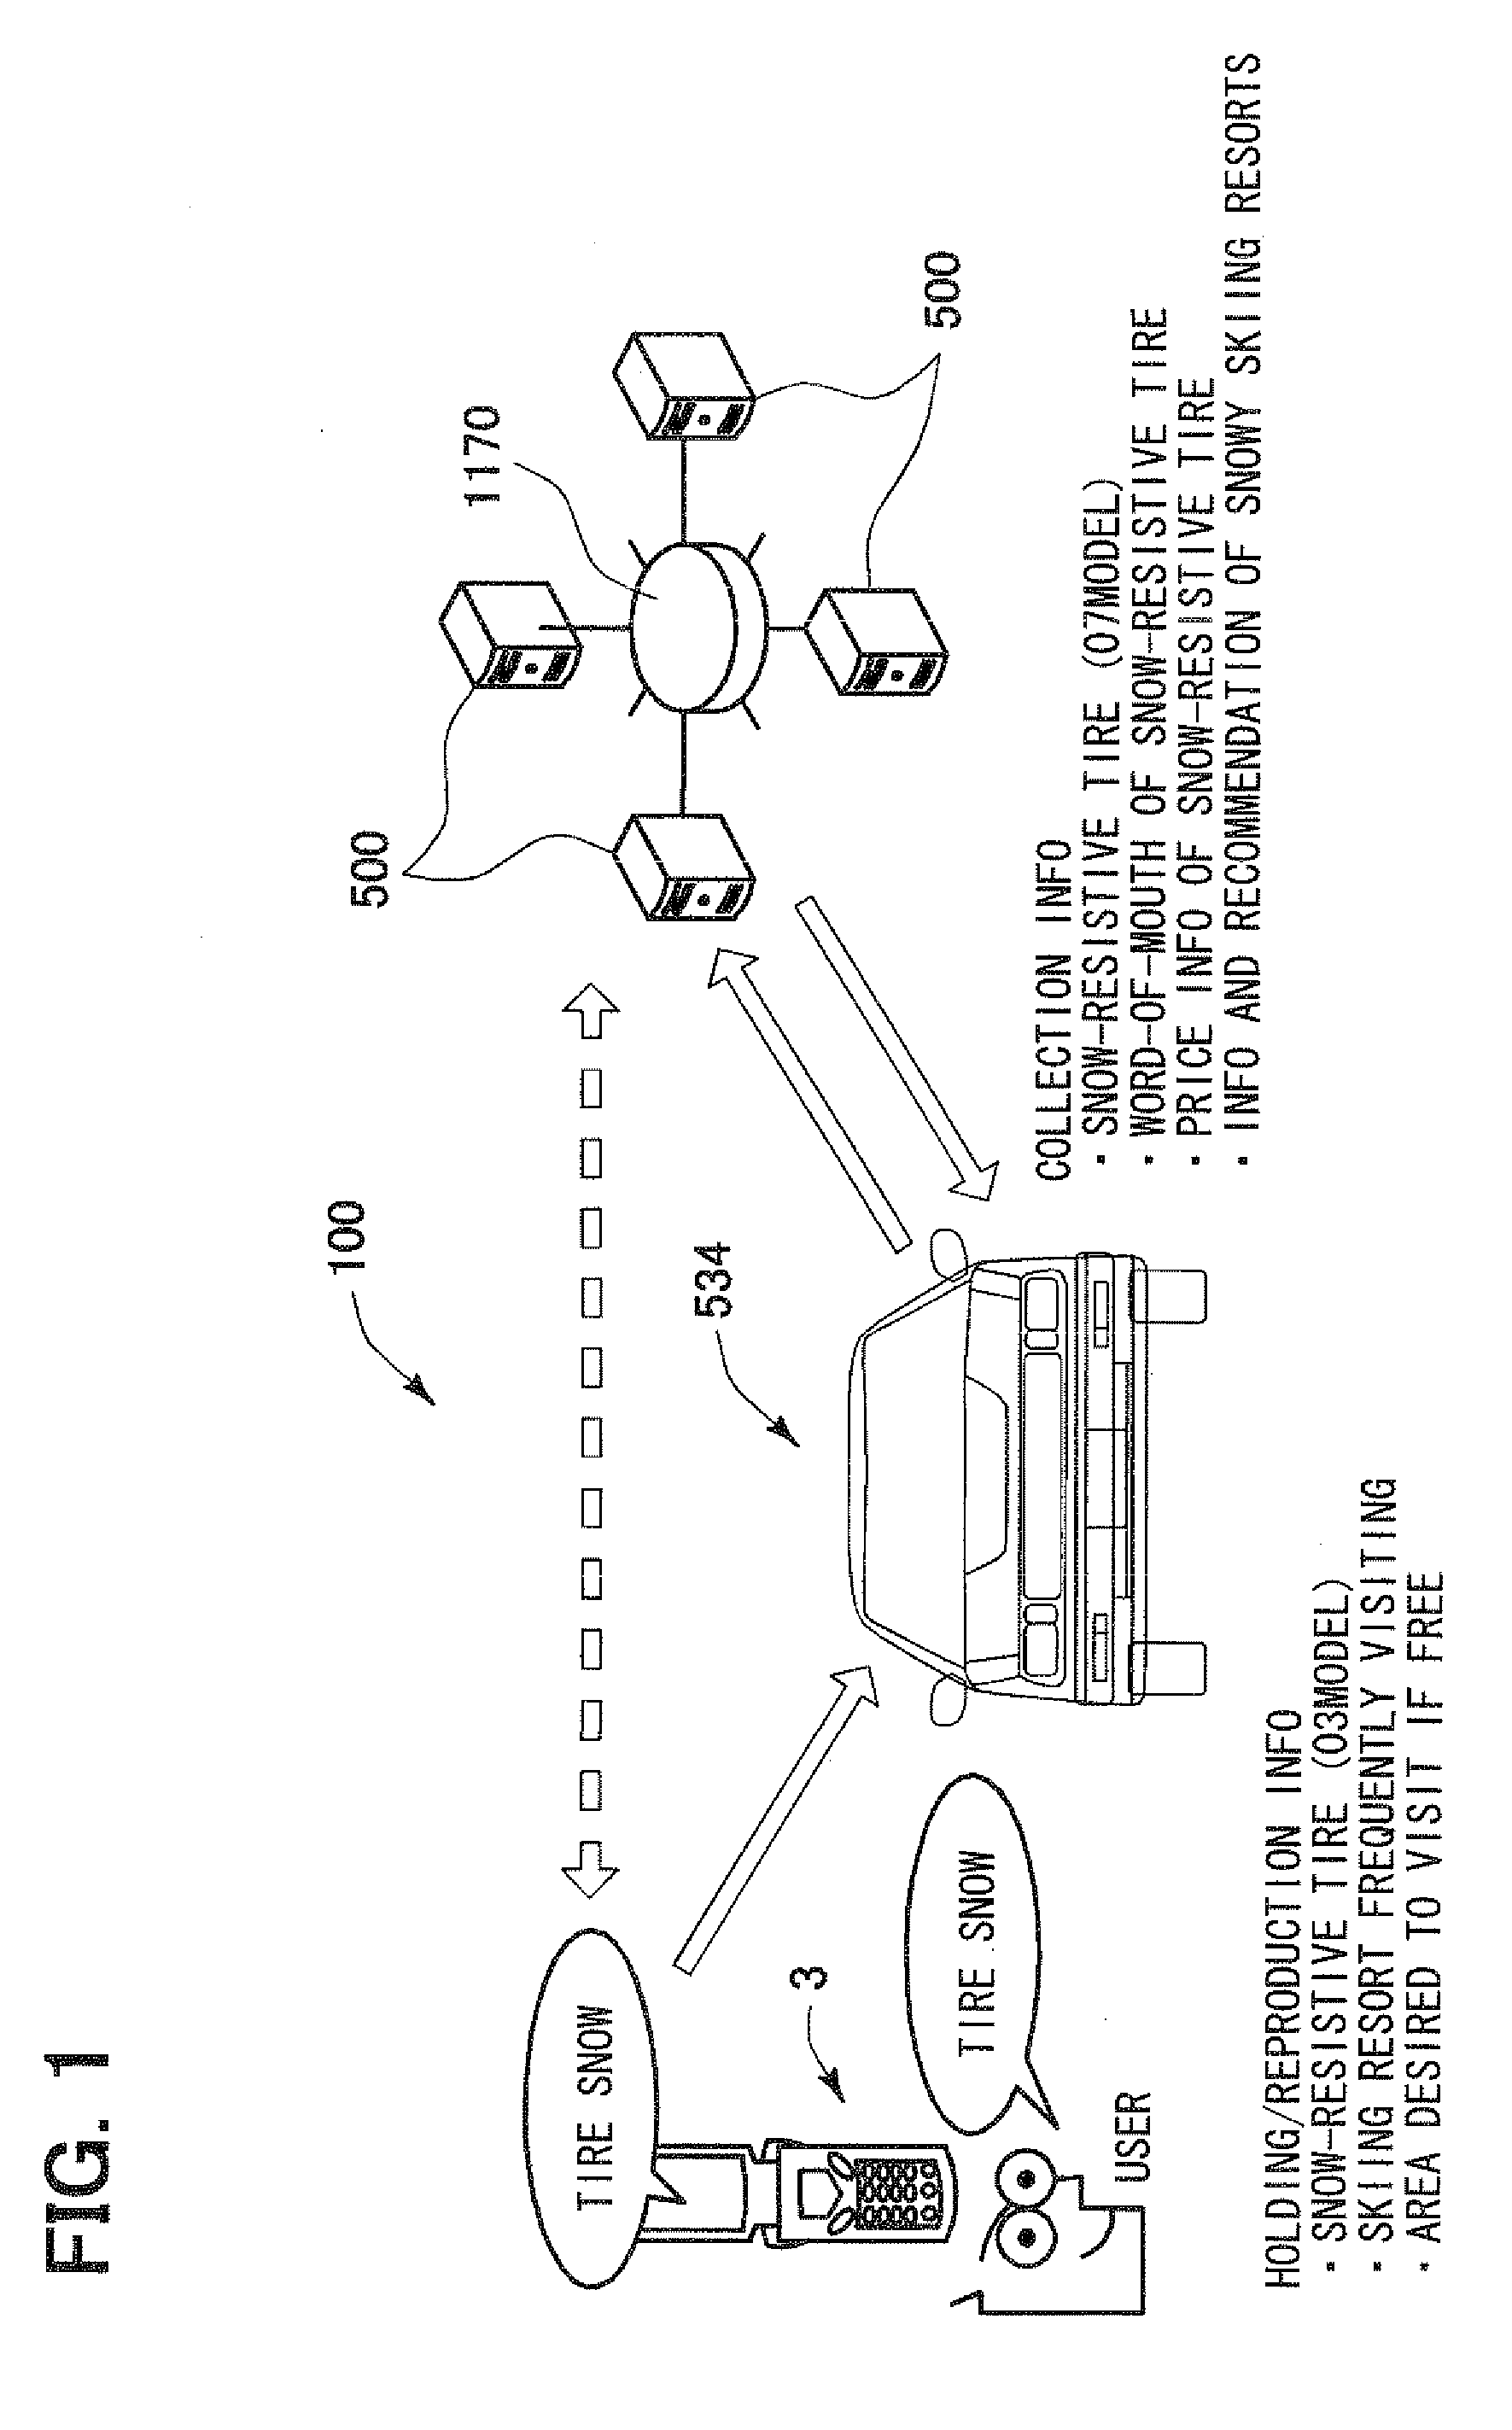 Information providing system for vehicle